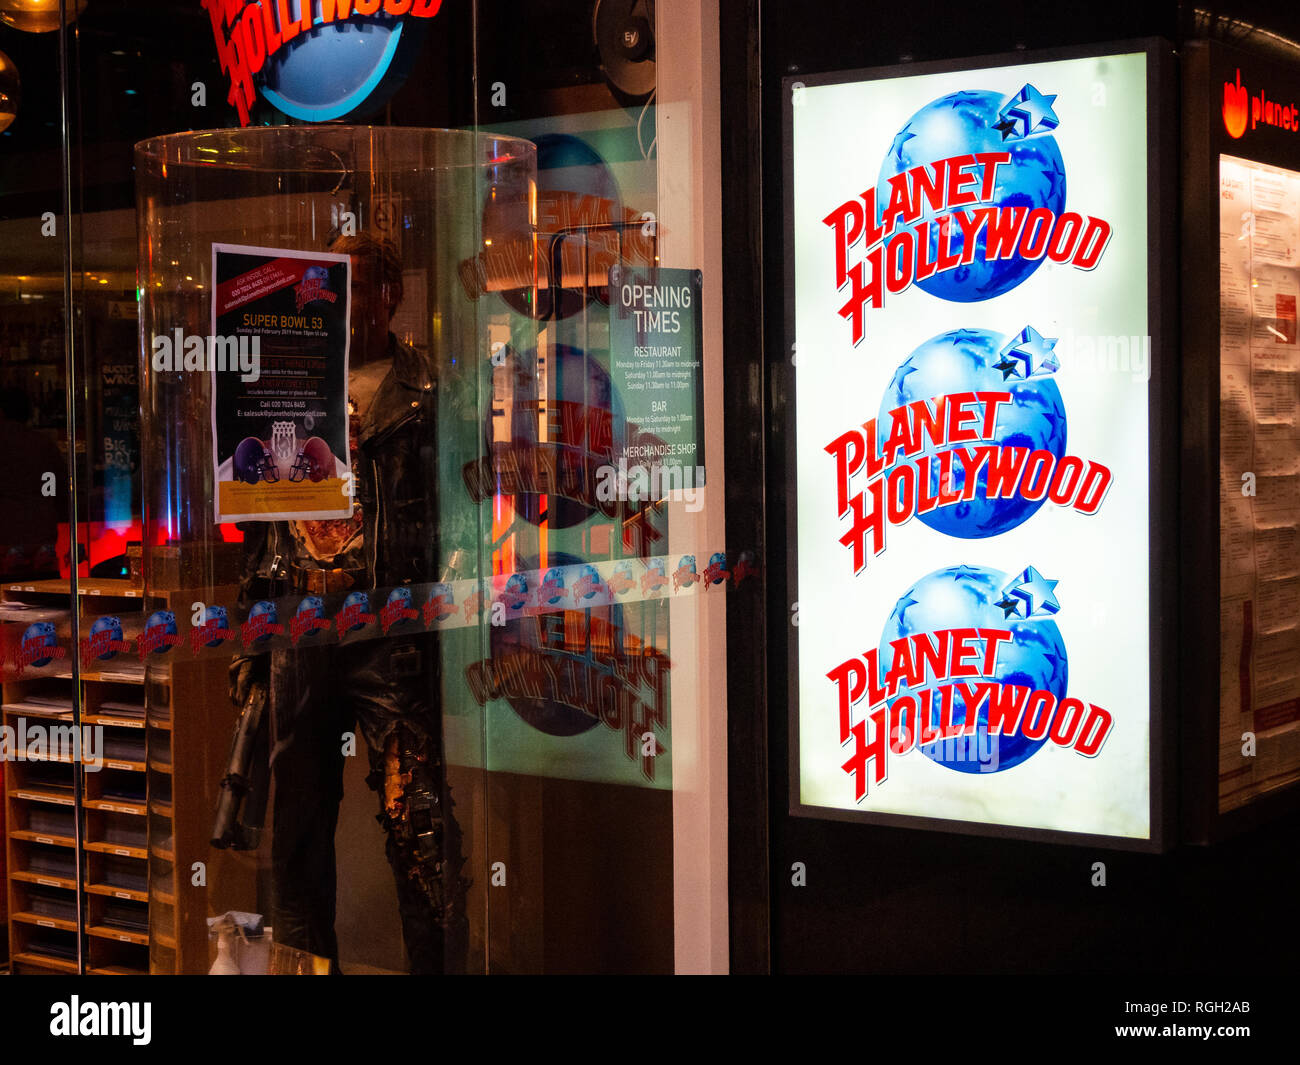 London,UK - January 26th 2019: Planet Hollywood restaurant in London. The famous Hollywood themed restaurant chain was founded by a group of film acto Stock Photo